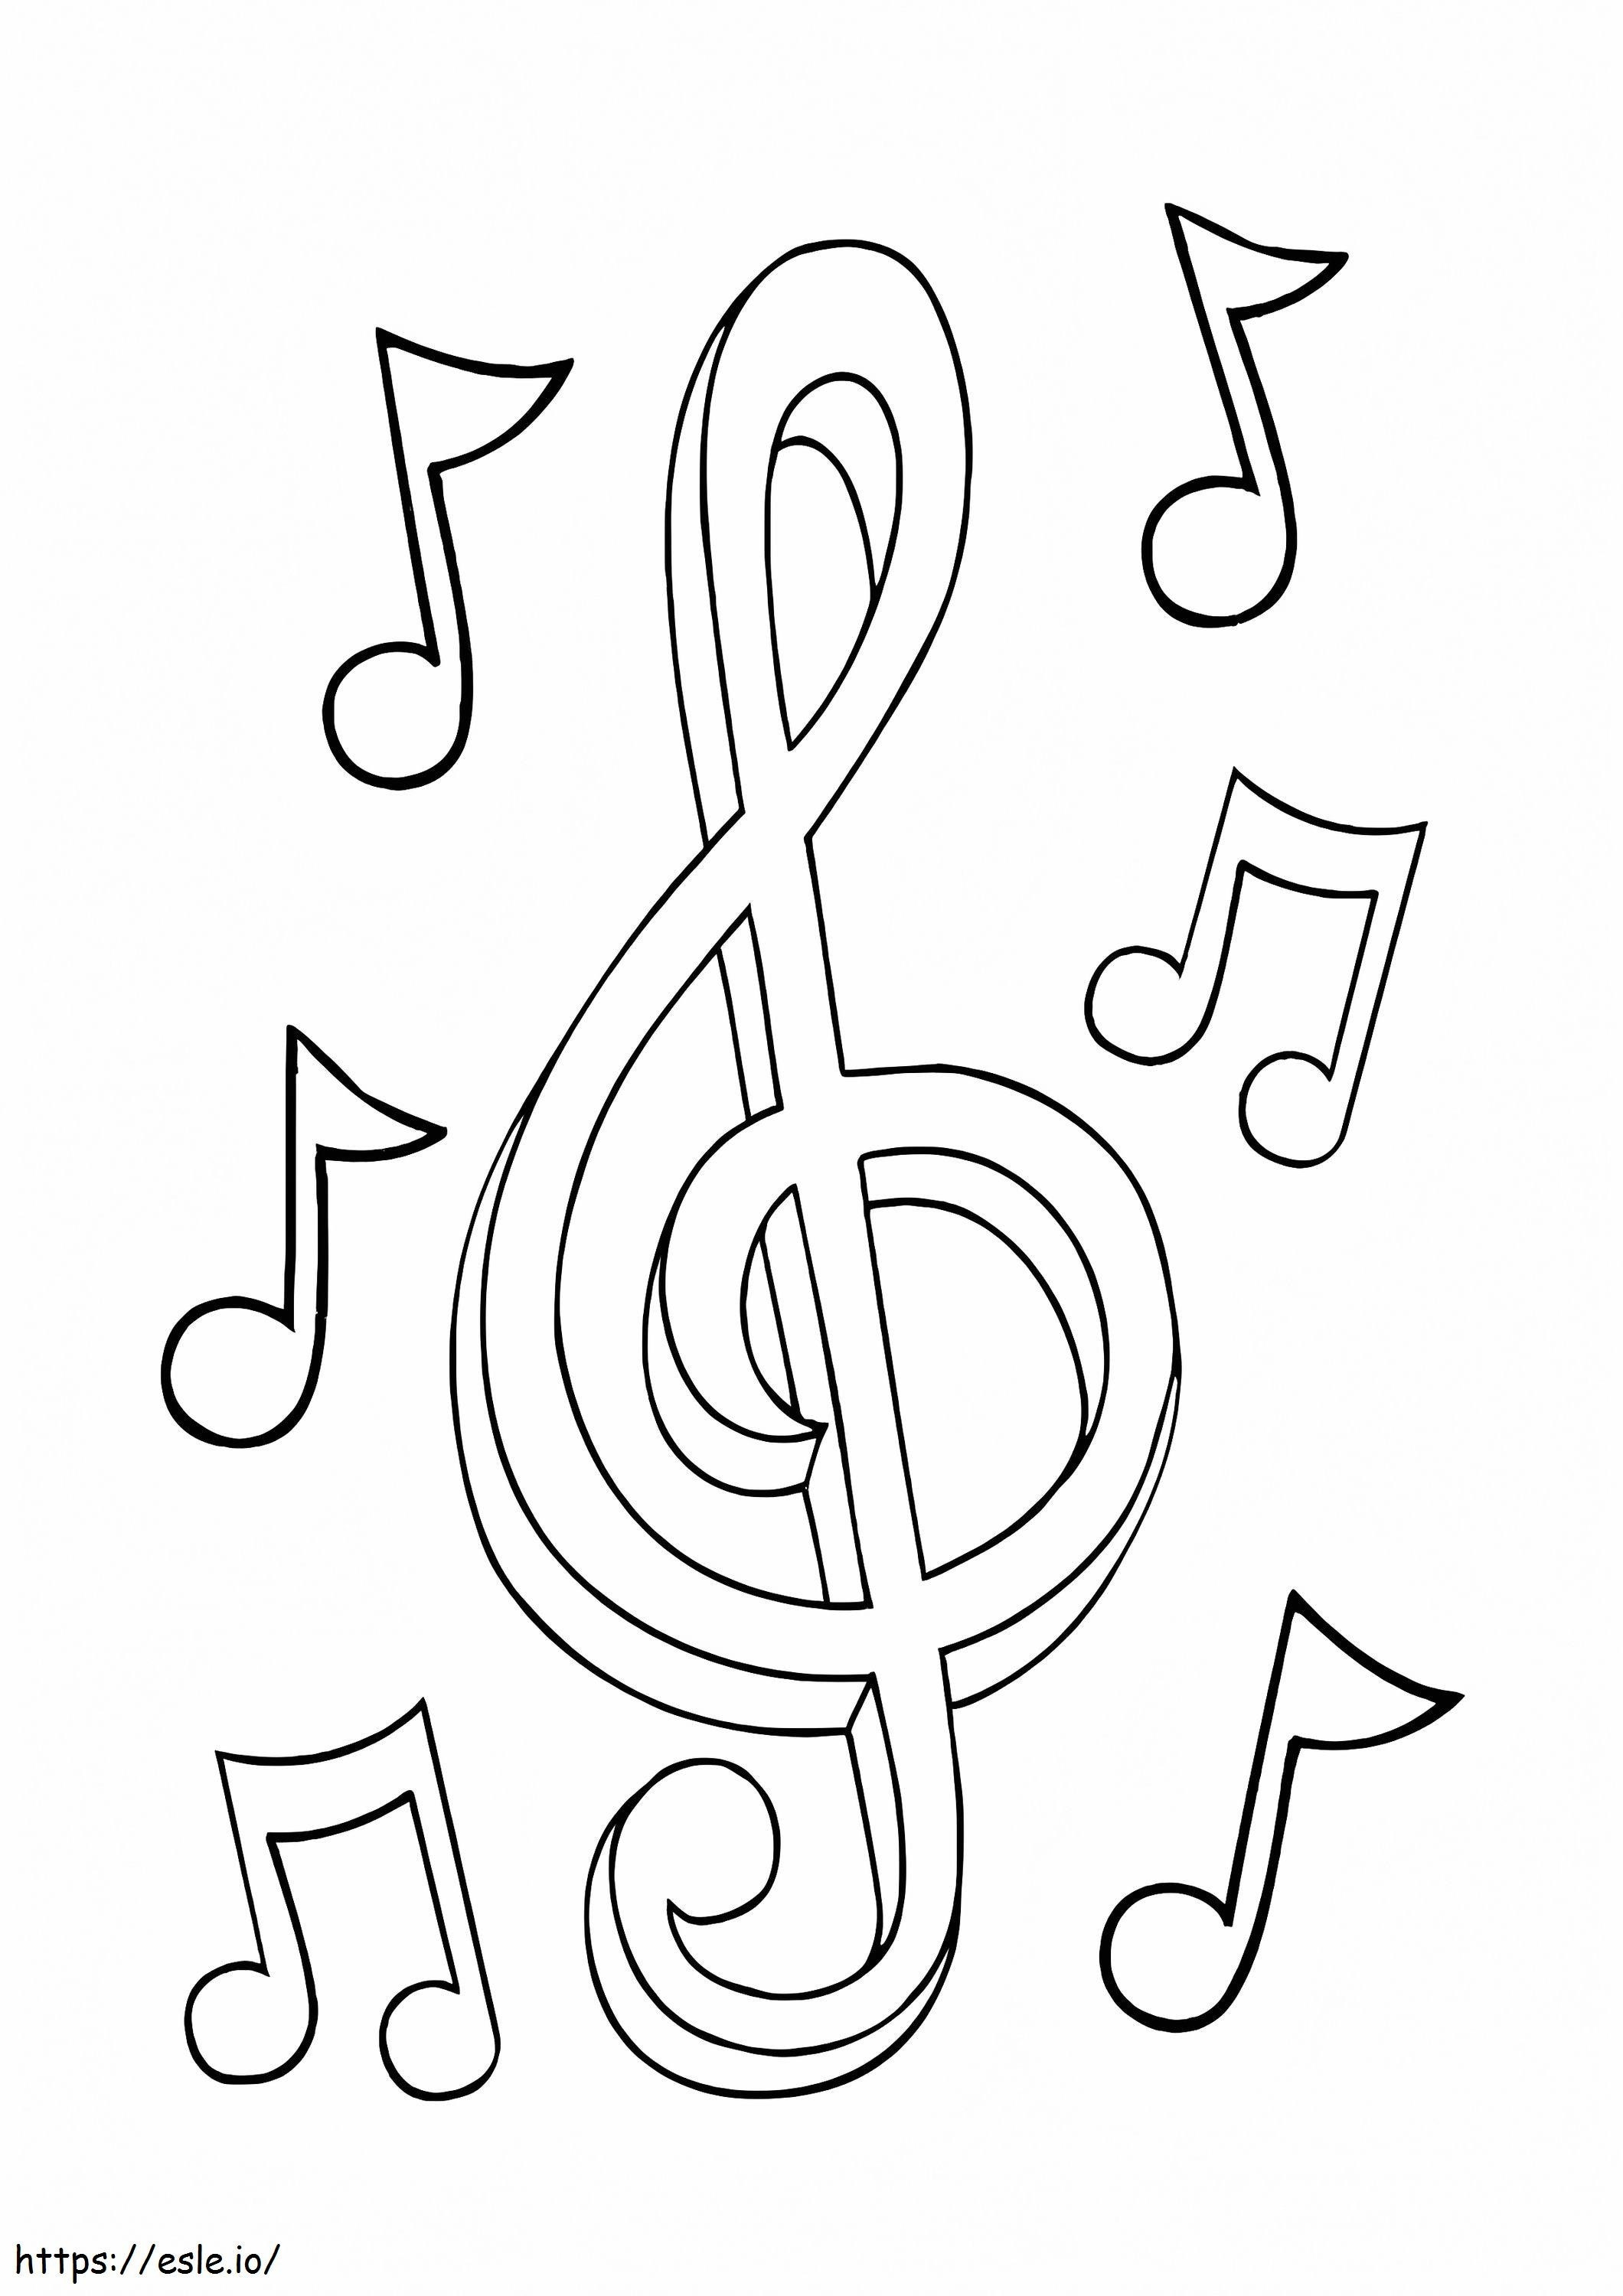 Normal Music Note coloring page